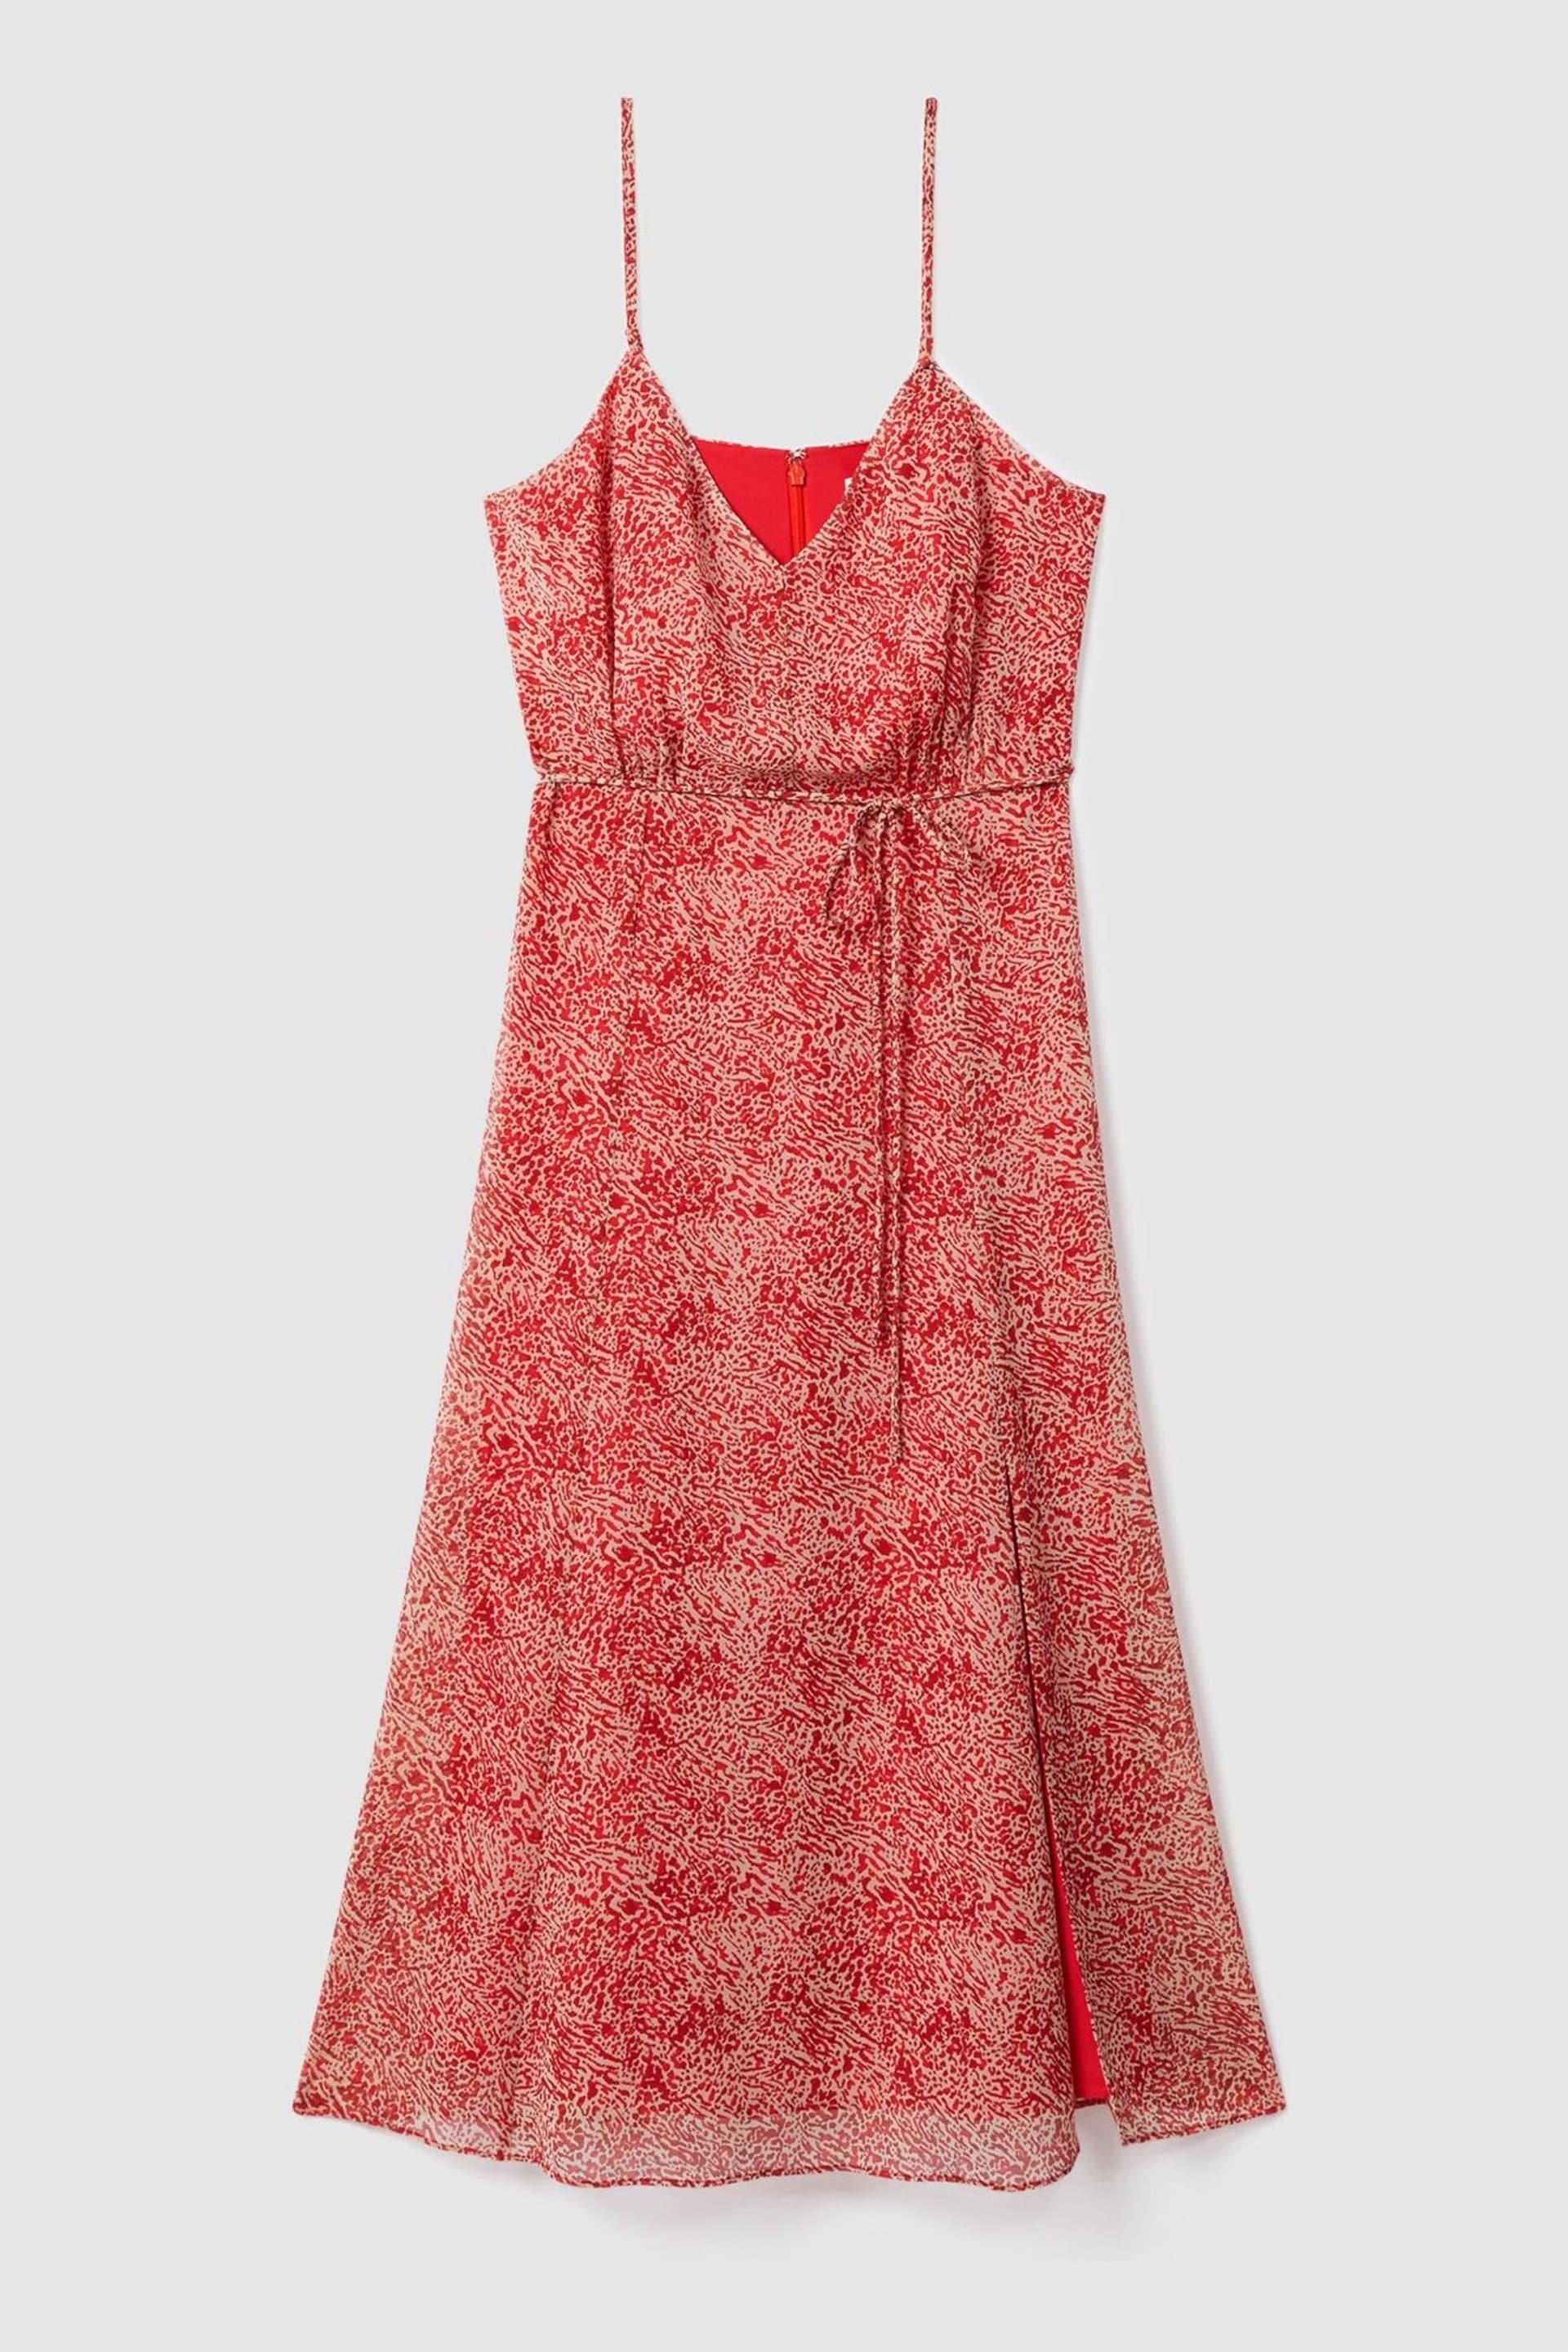 Reiss Red Olivia Printed Belted Midi Dress - Image 2 of 7